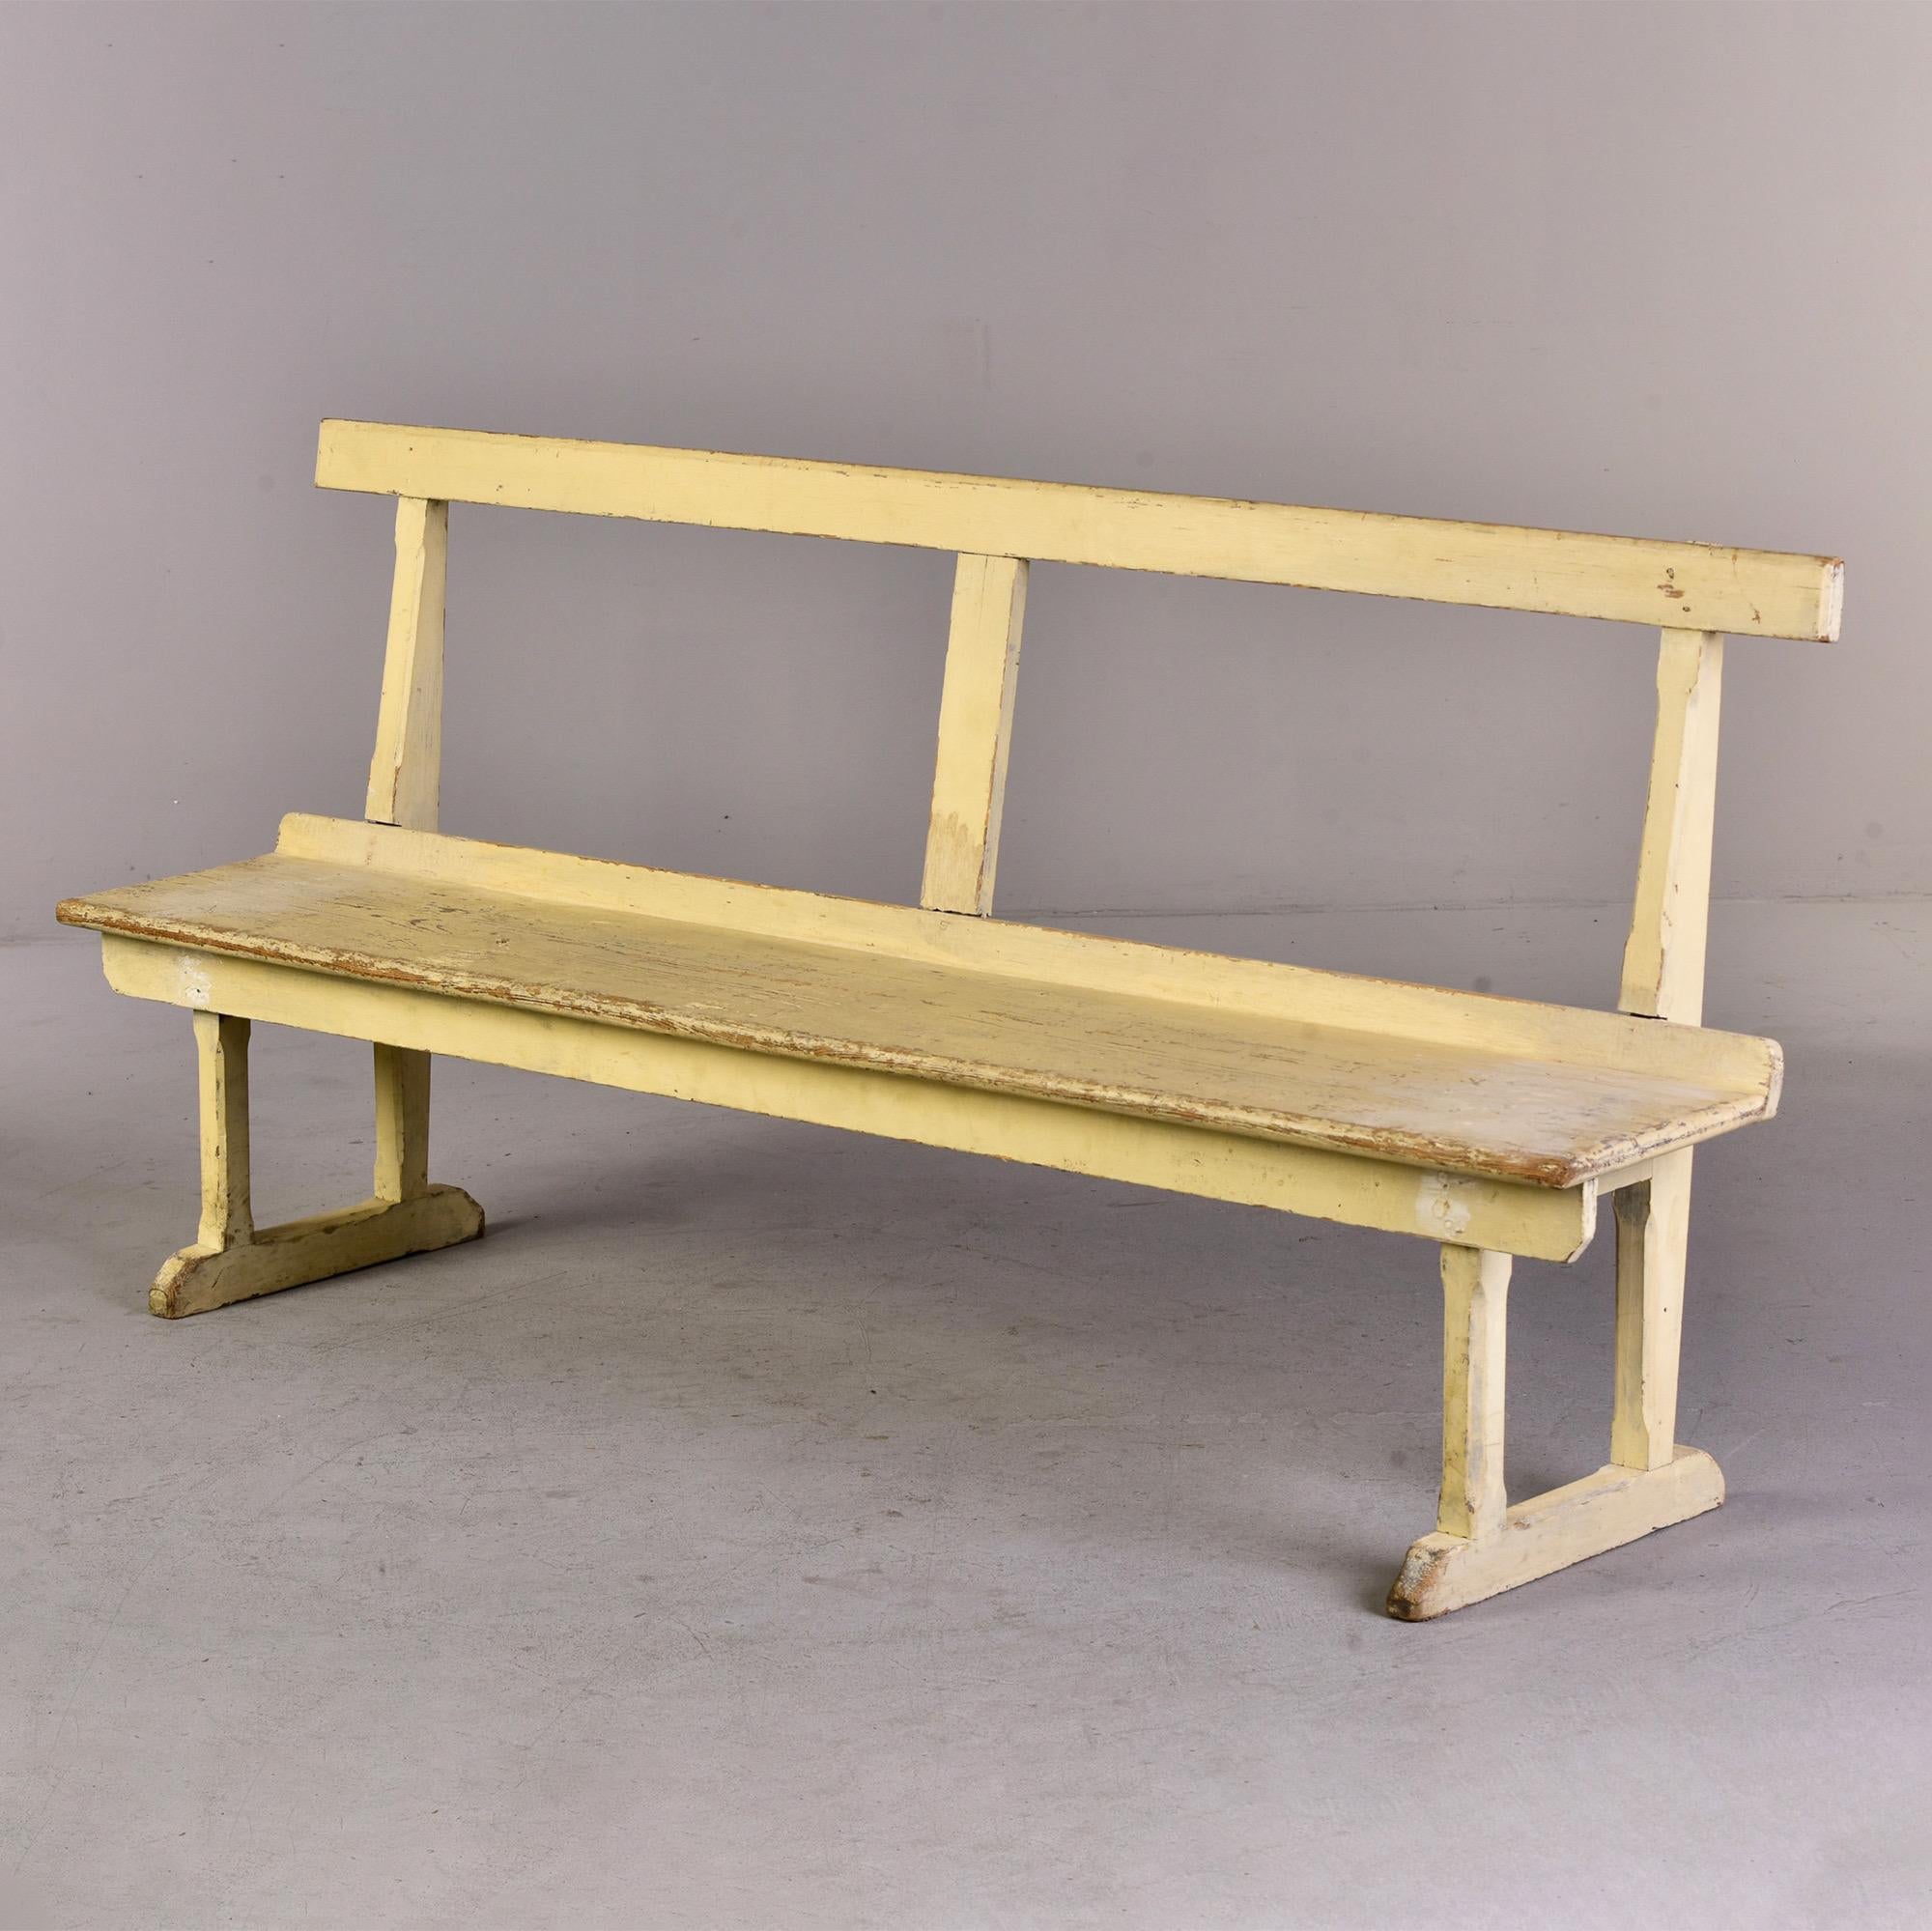 Circa 1880s English slender wooden bench with pale, butter yellow painted finish. Two benches in this size and finish available at the time of this posting. Sold and priced individually. 

Measures: Seat height: 16” seat depth: 11.5”.
    